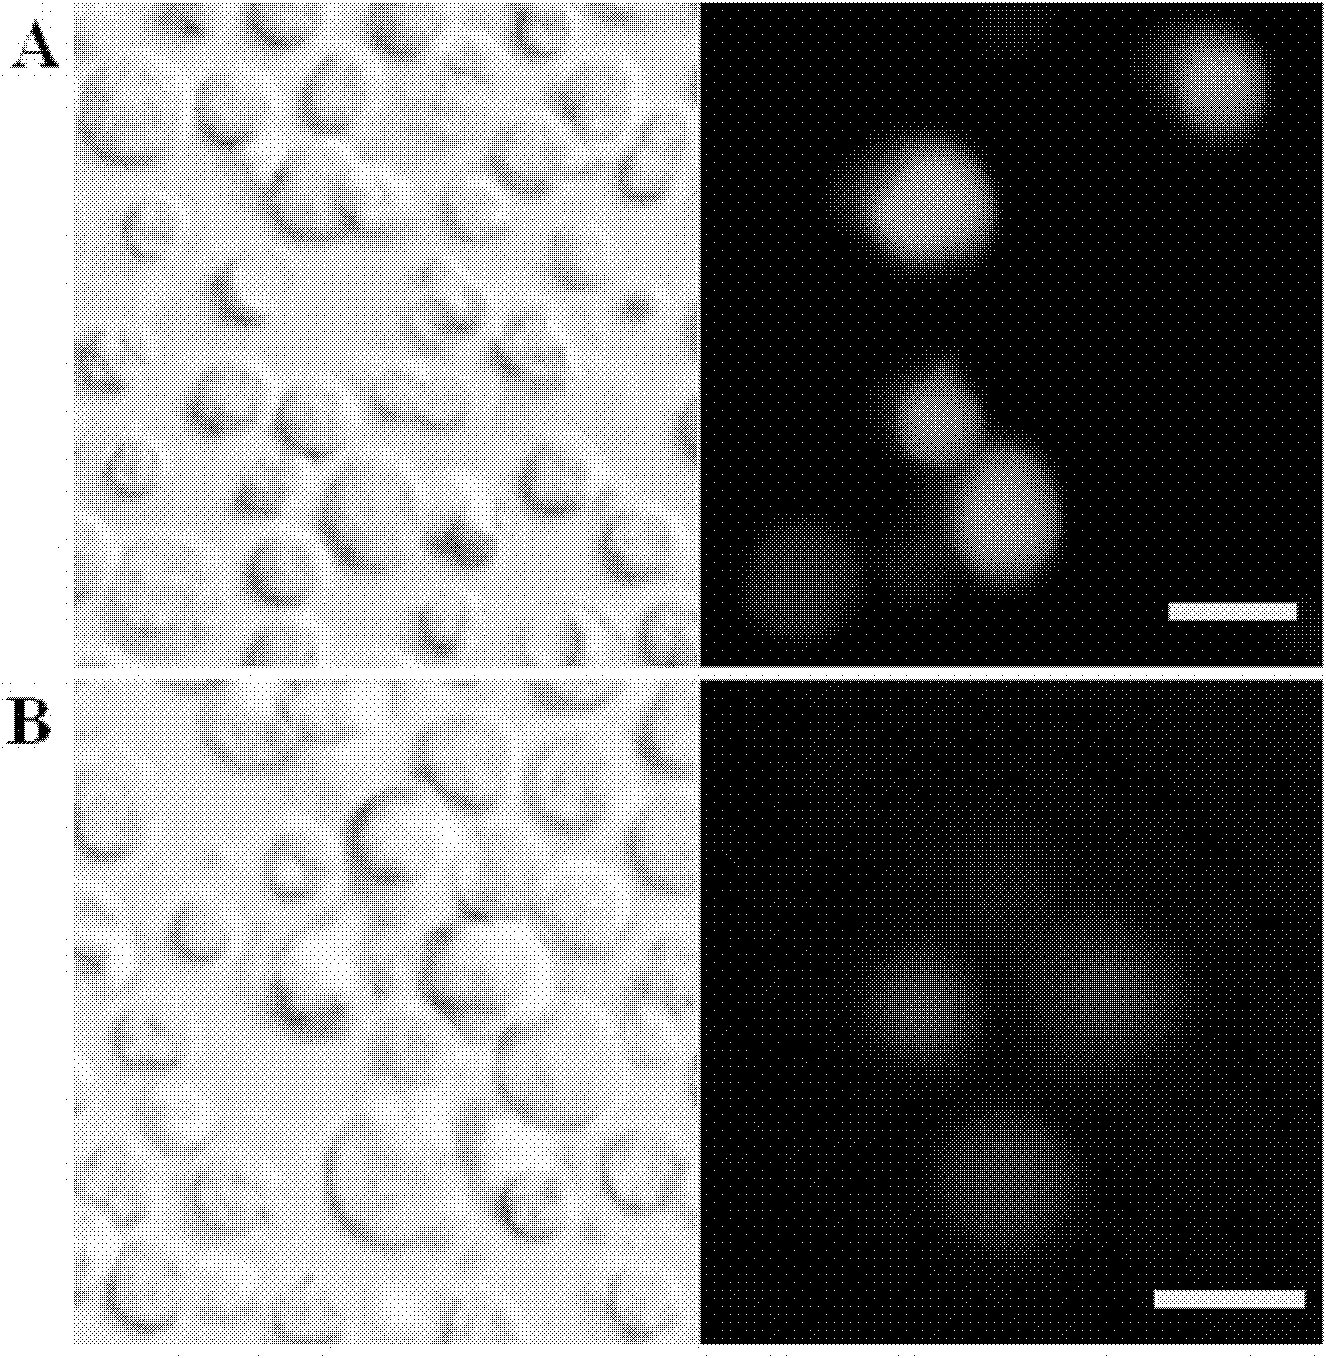 Method for transfecting pig T lymphocytes in vitro by applying nuclear transfection method